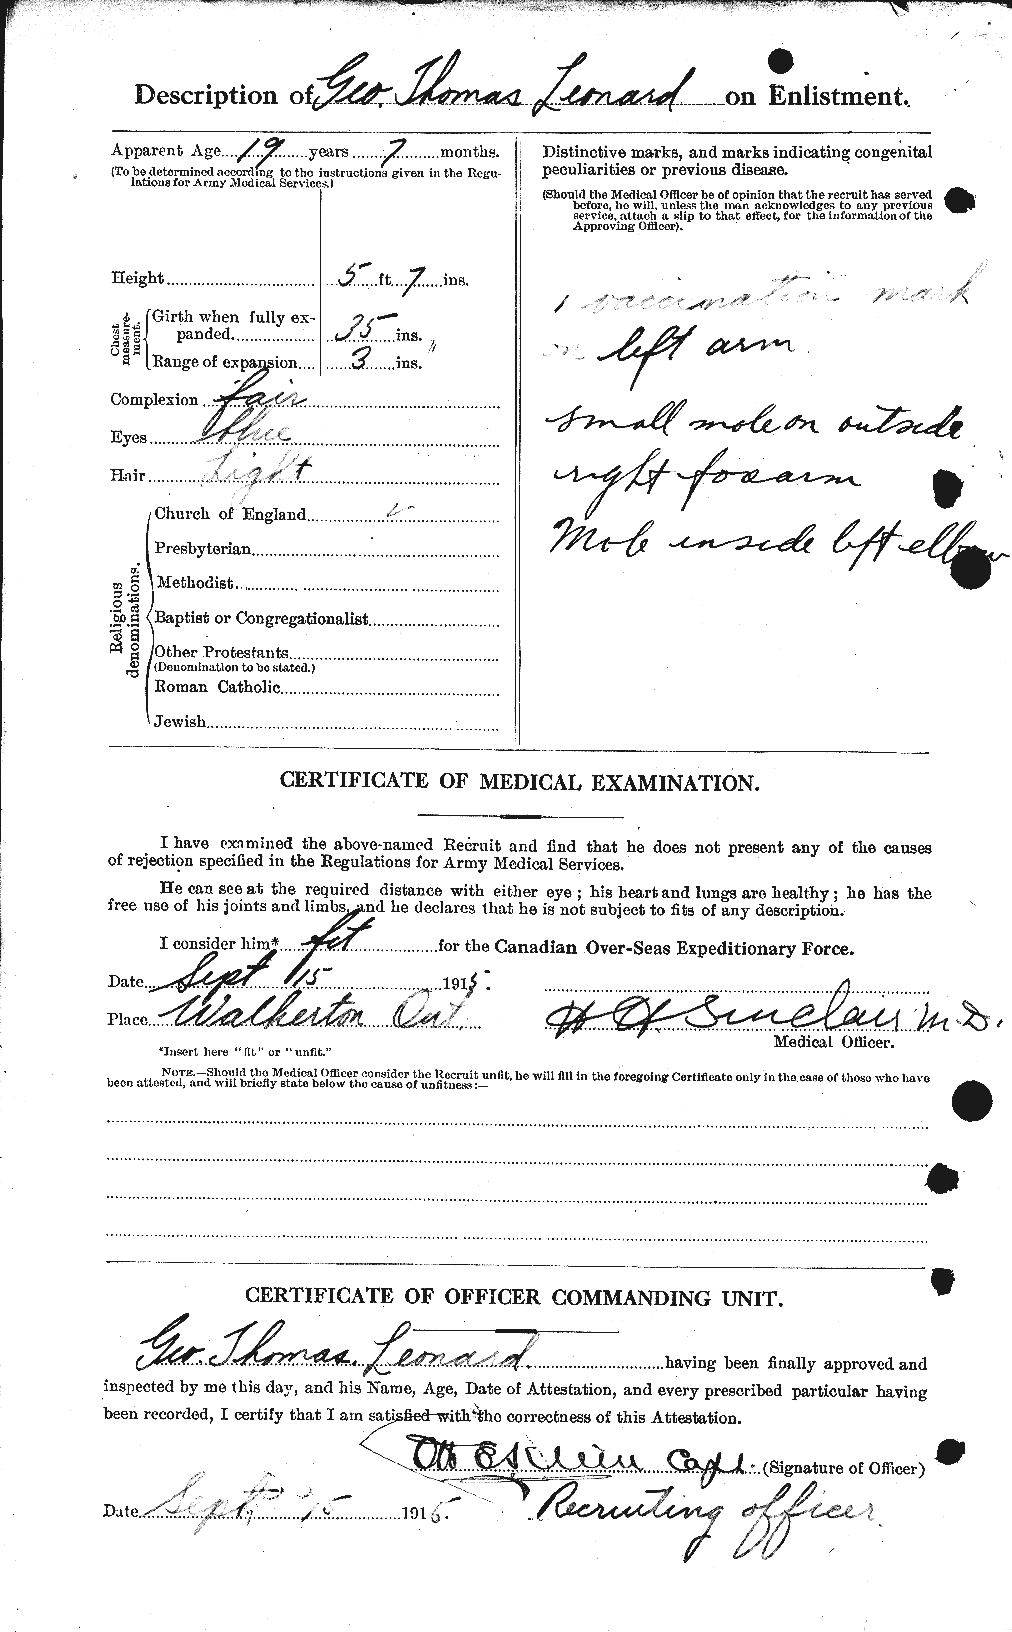 Personnel Records of the First World War - CEF 460763b